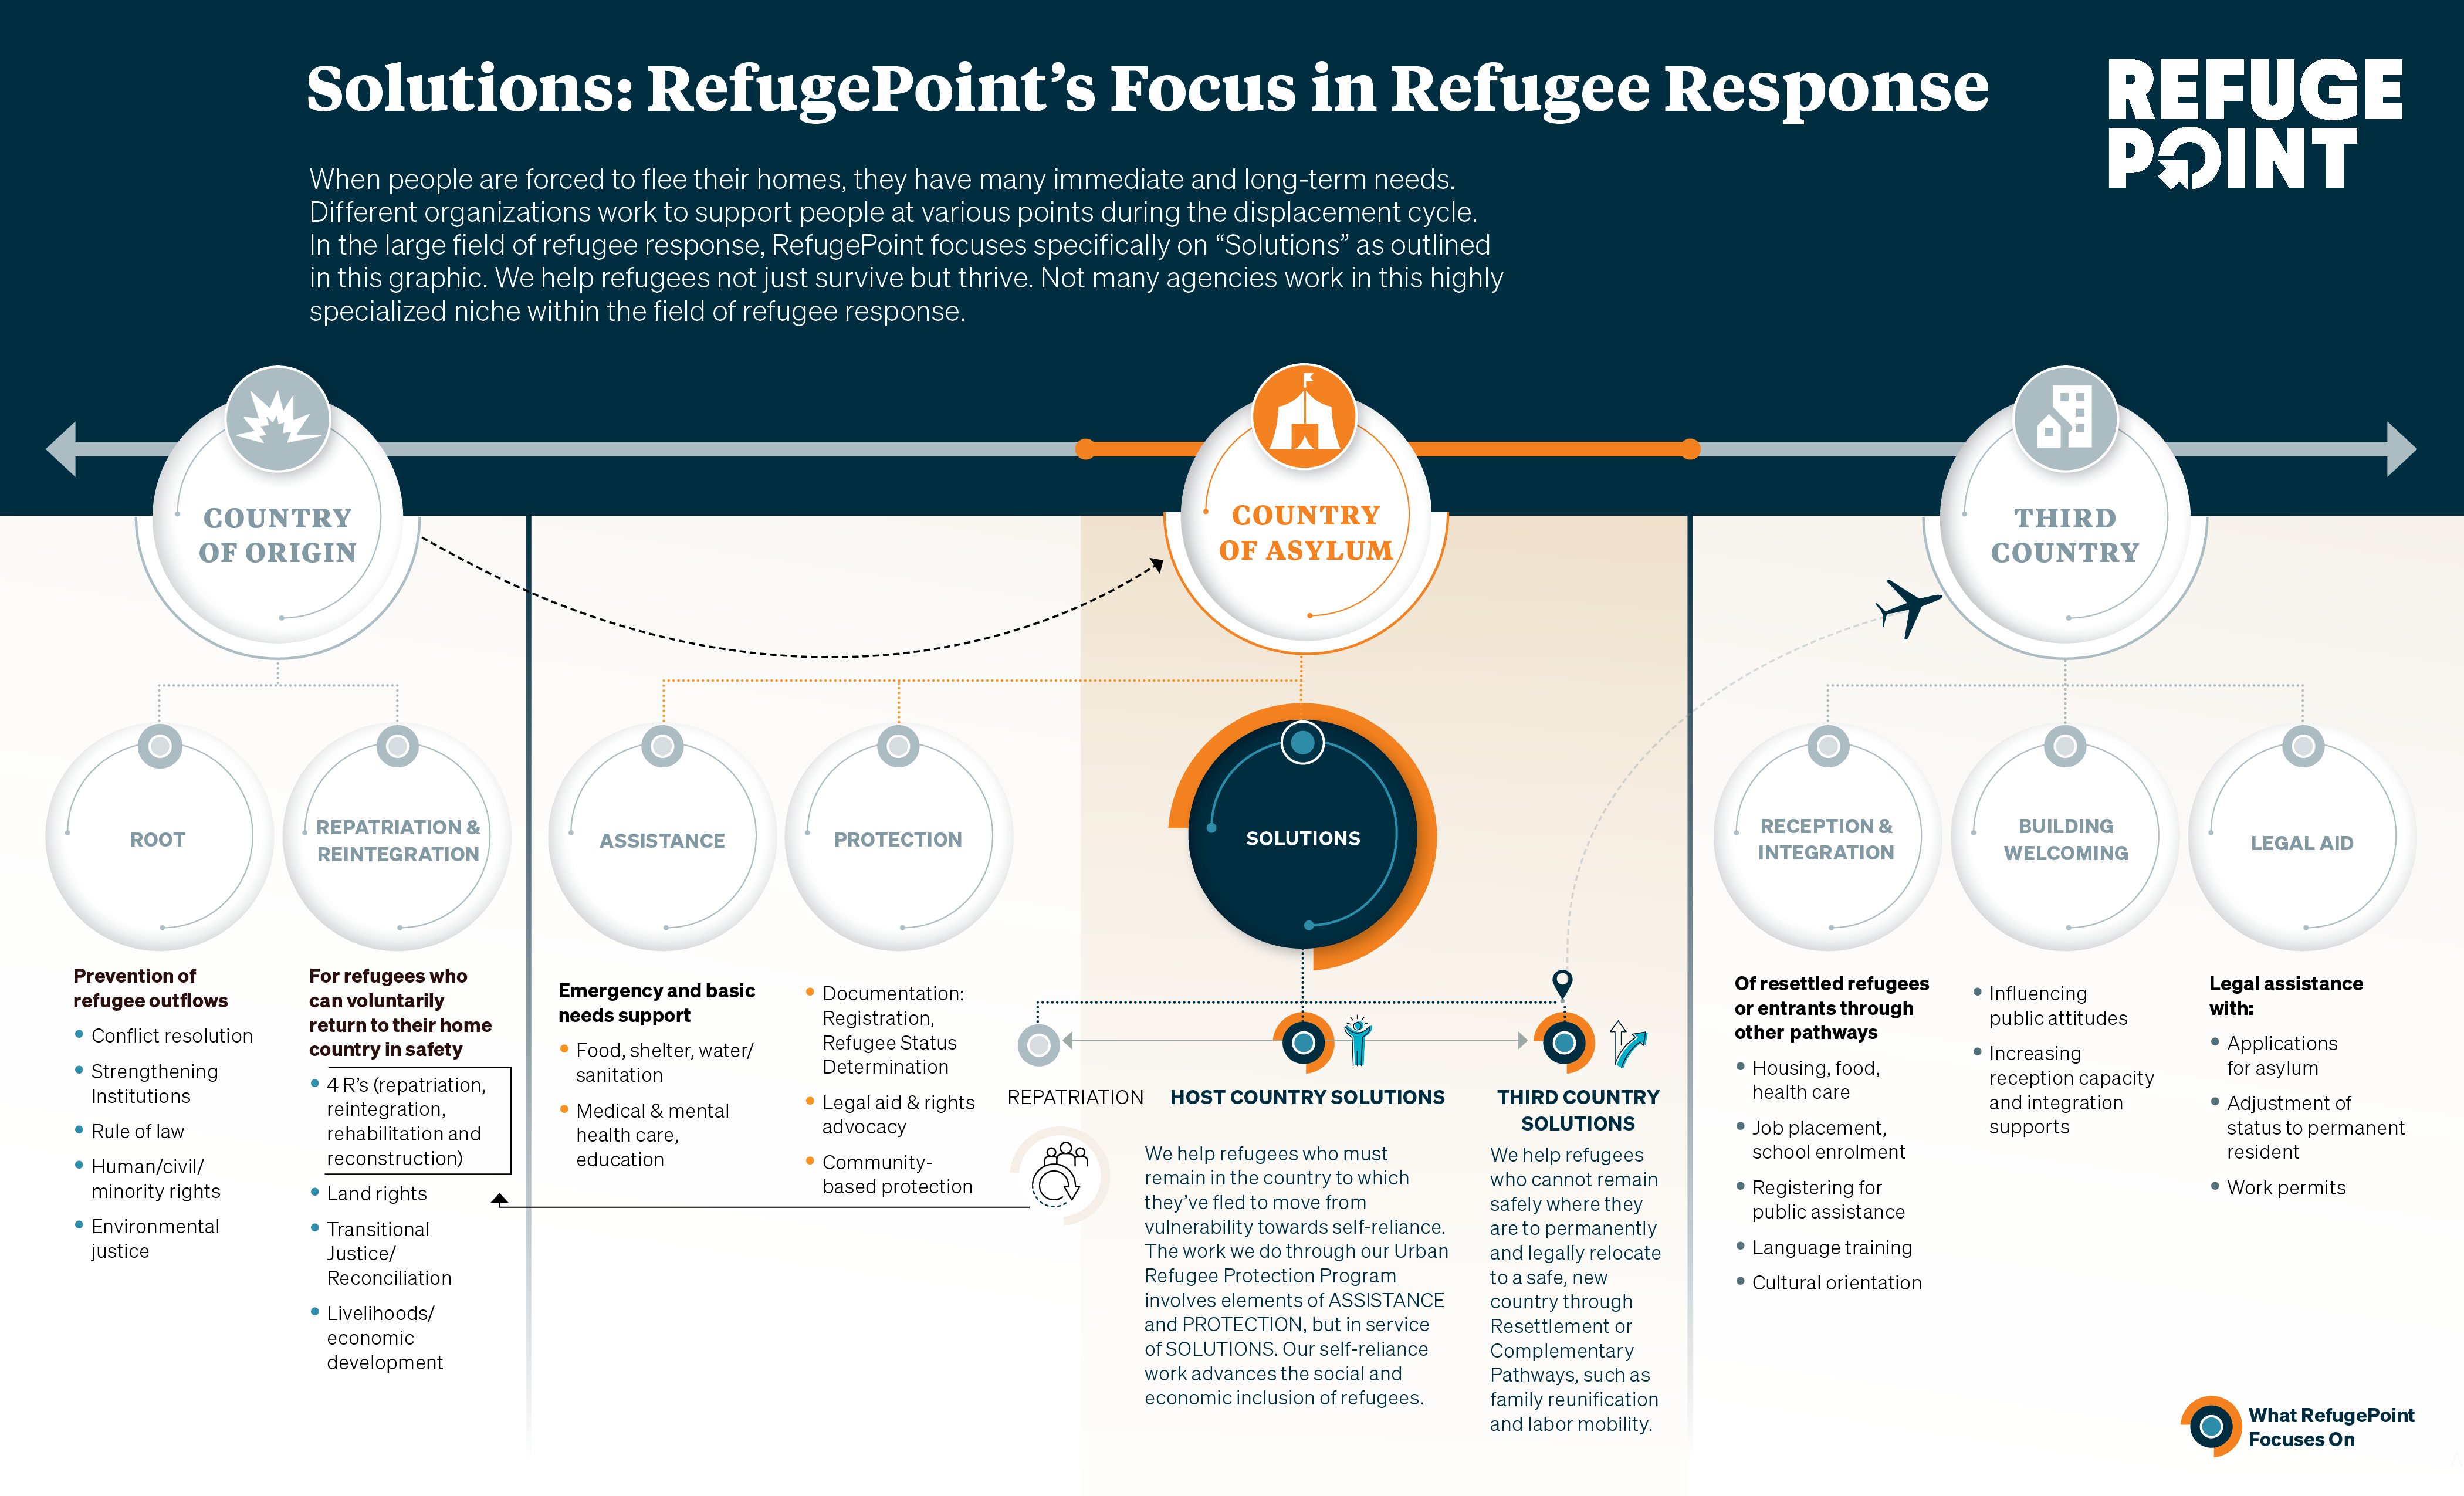 Locating RefugePoint in the Field of Refugee Response